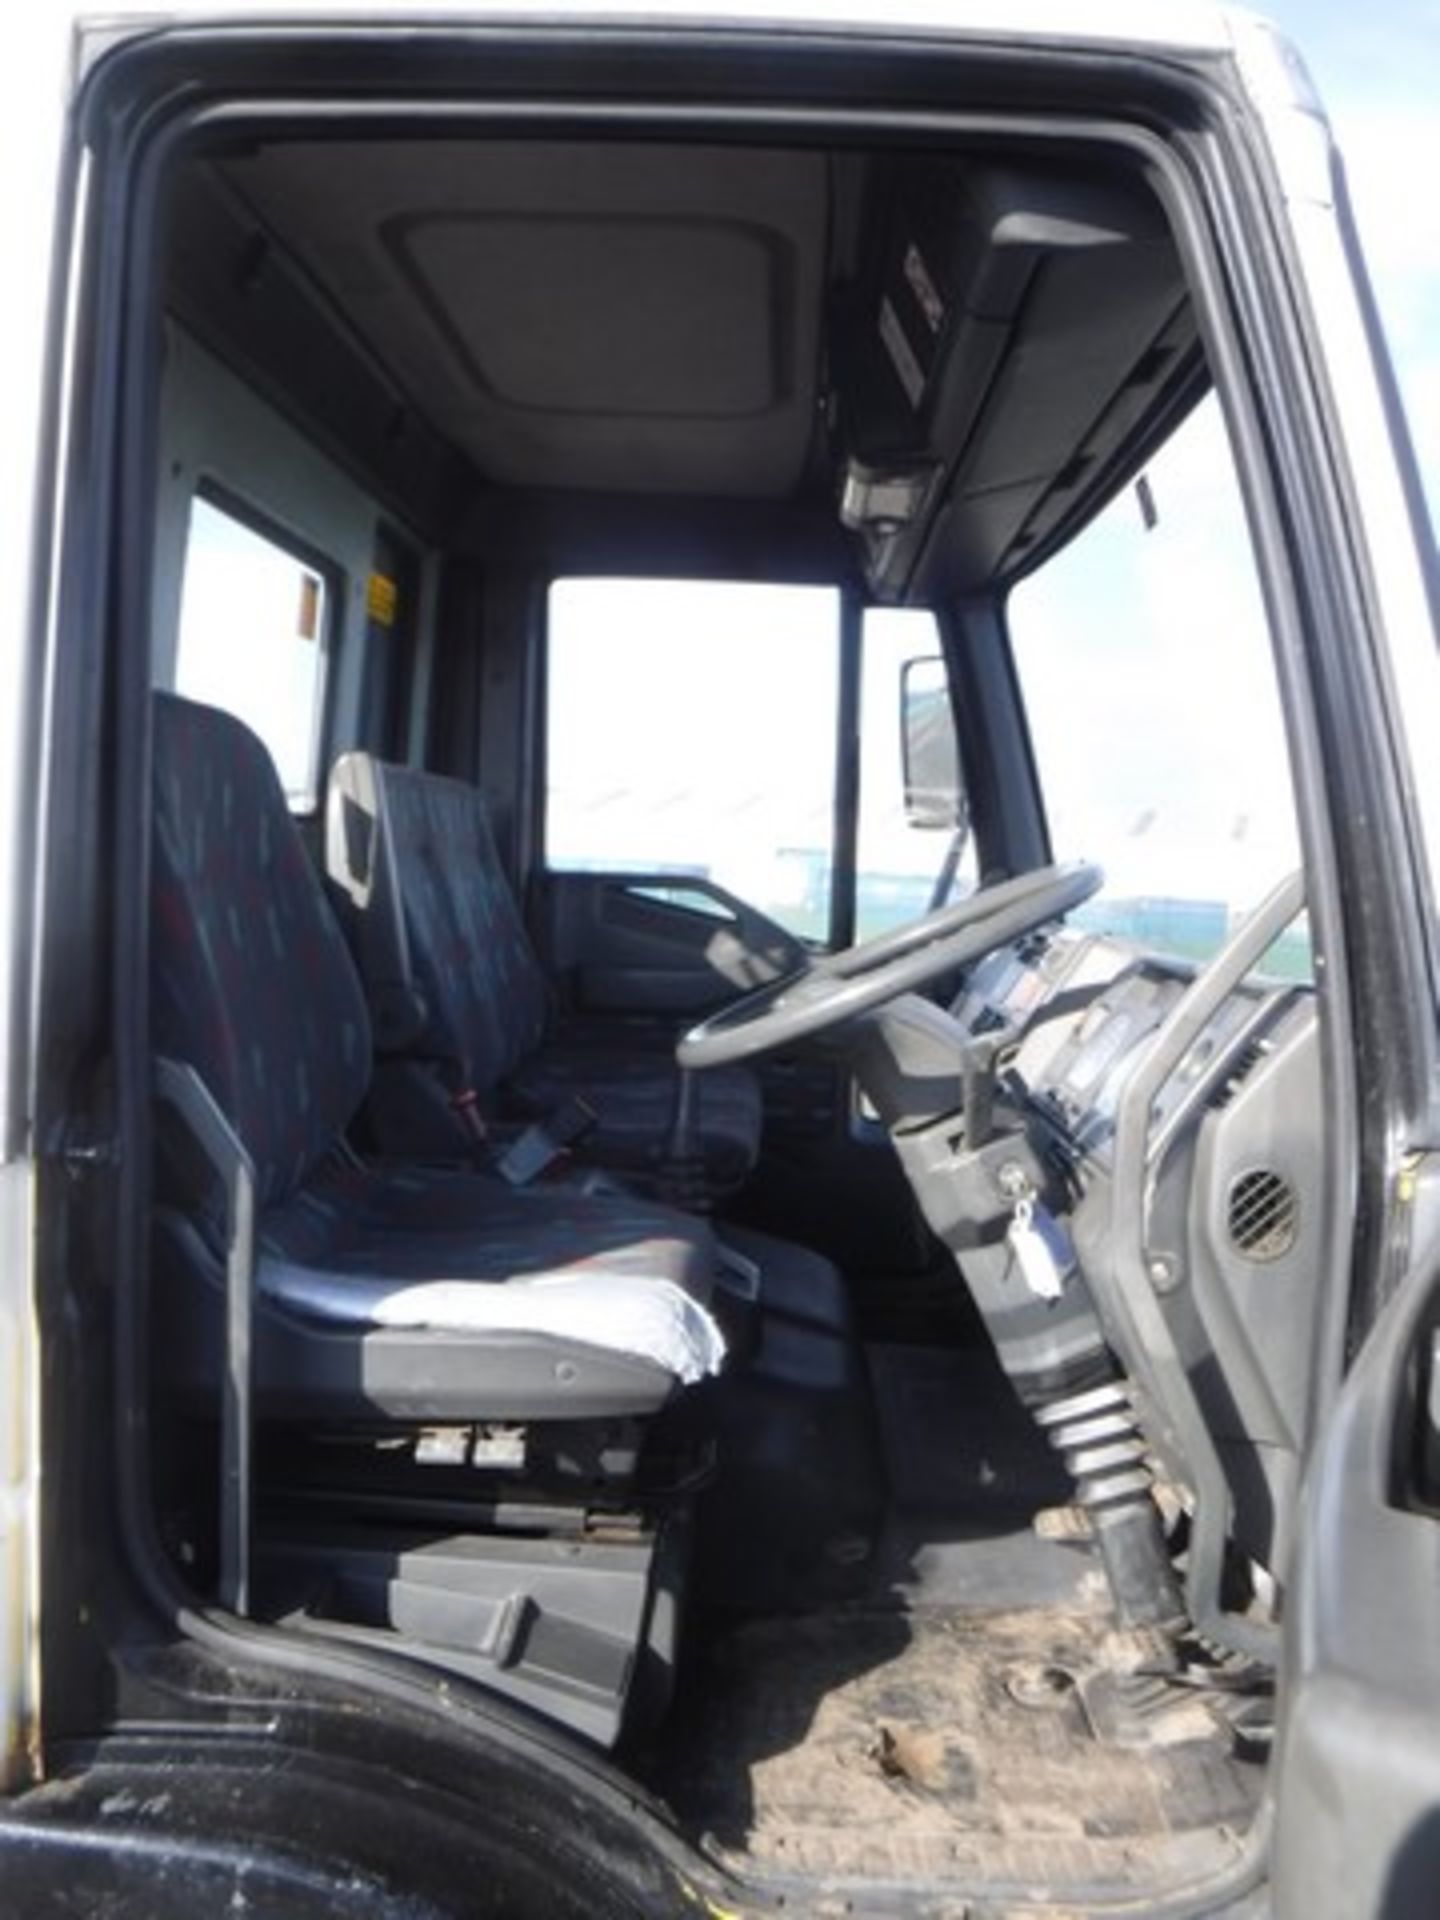 IVECO-FORD MODEL NEW CARGO - 5861cc - Image 6 of 18